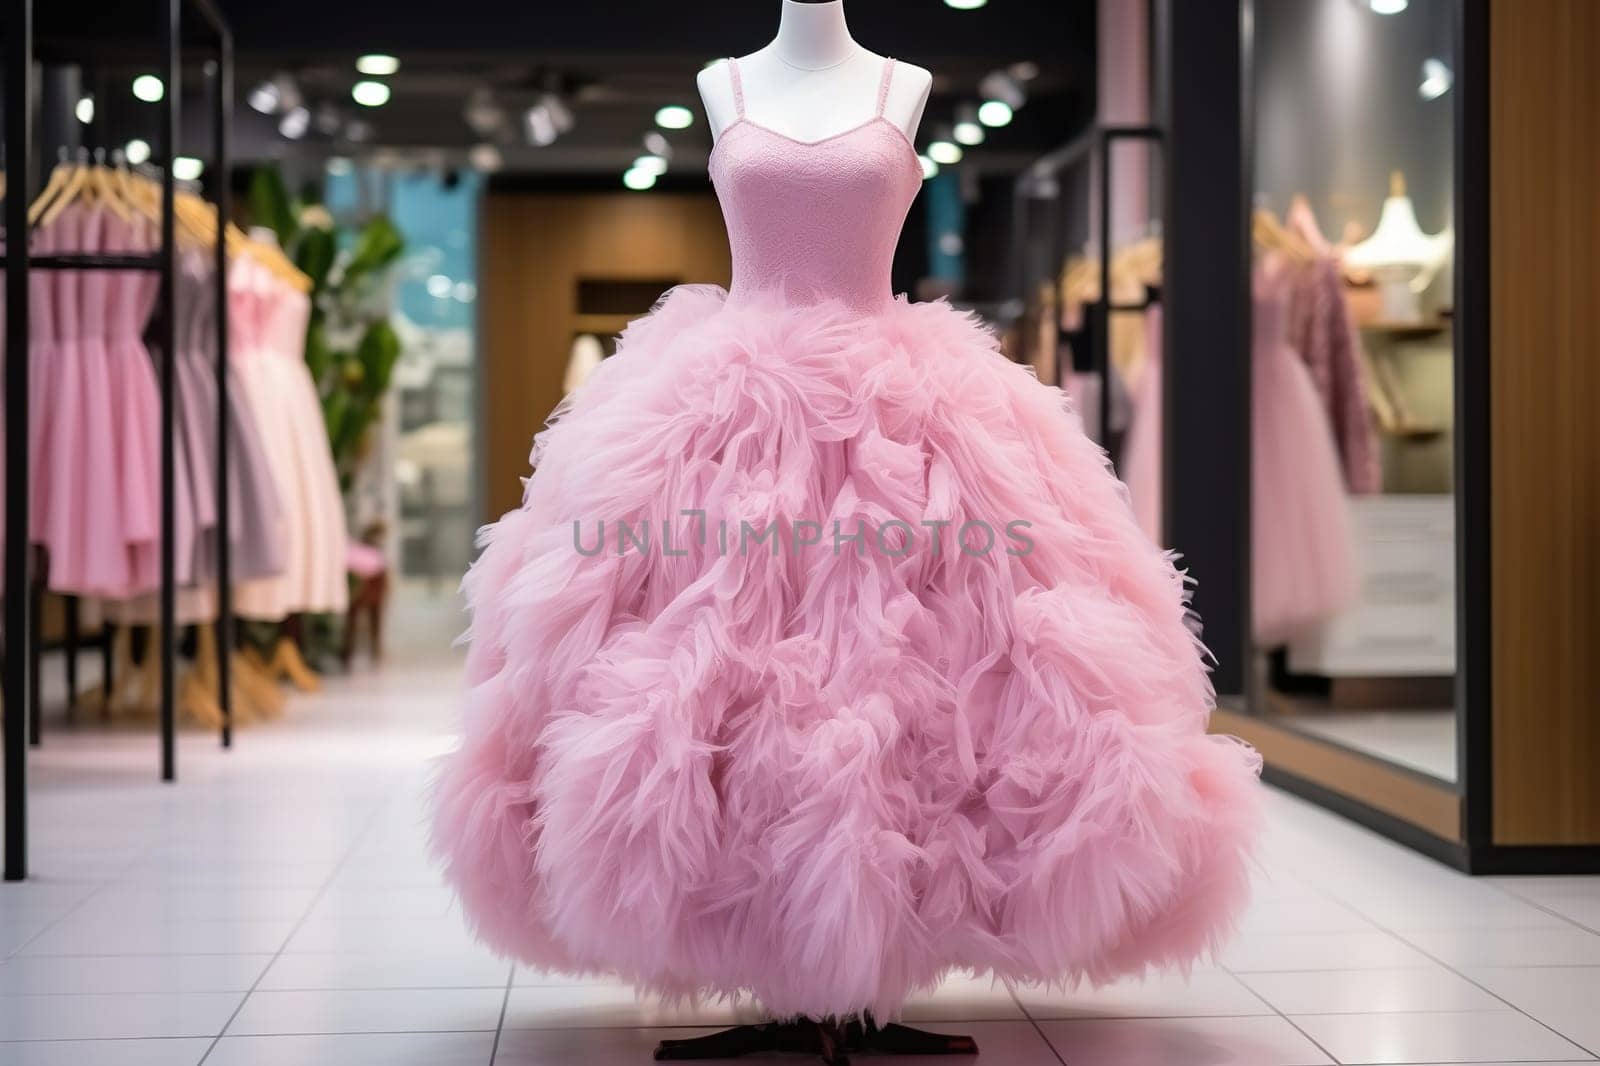 Elegant pink fluffy women's dress on a mannequin. Generated by artificial intelligence by Vovmar